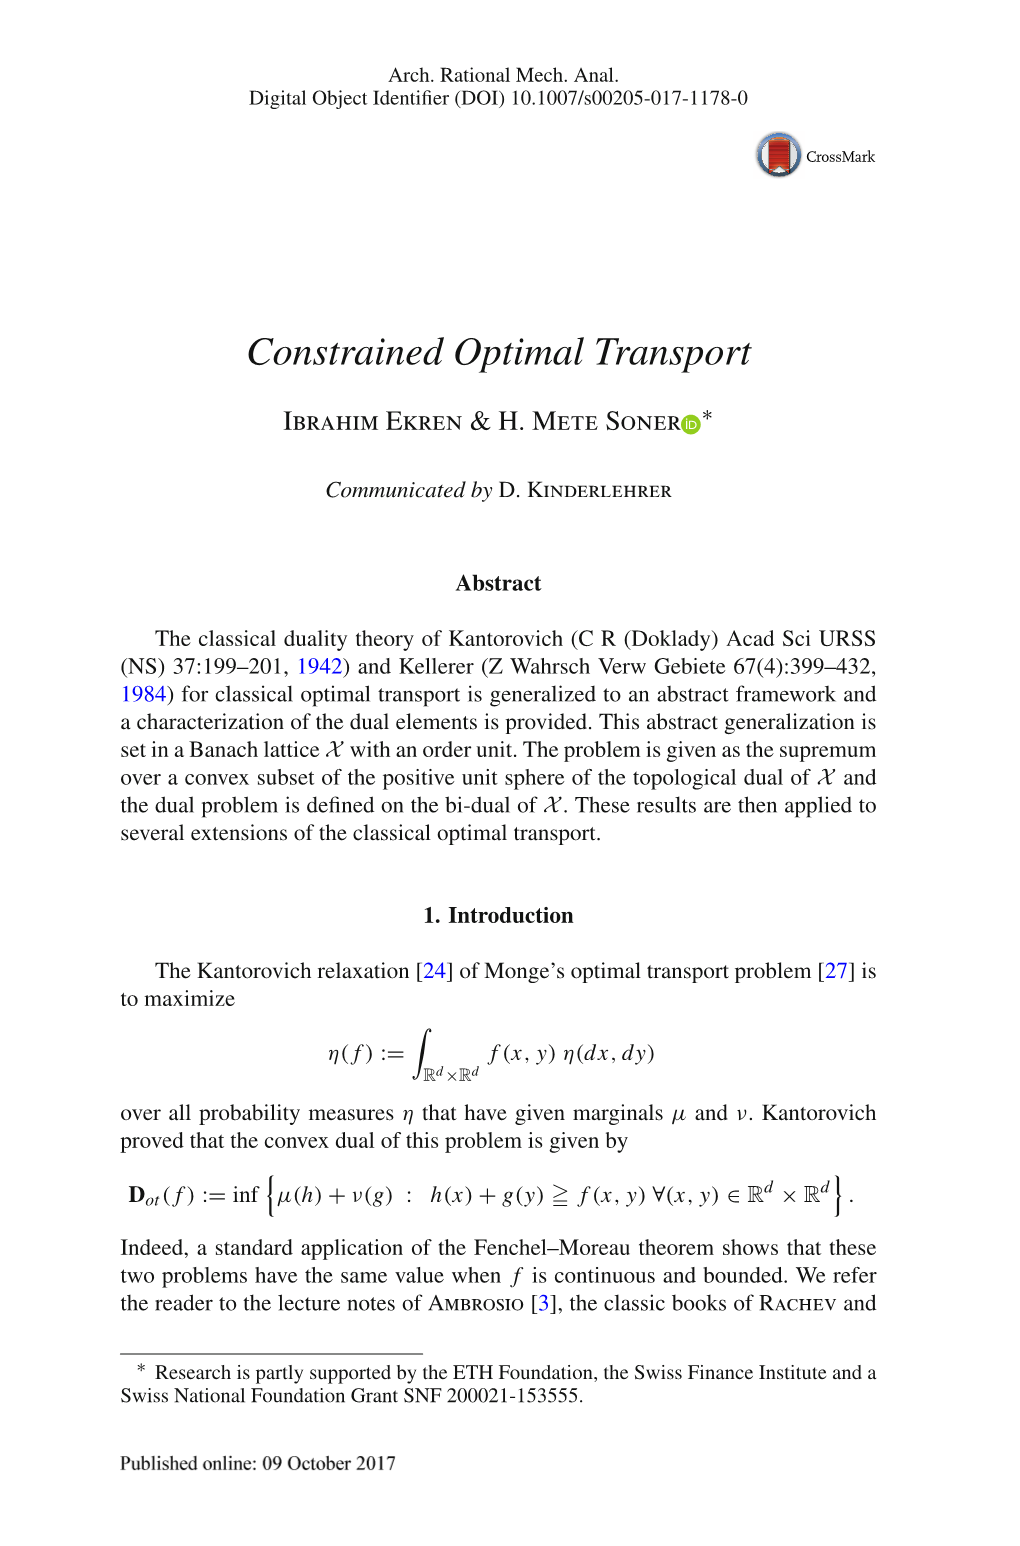 Constrained Optimal Transport